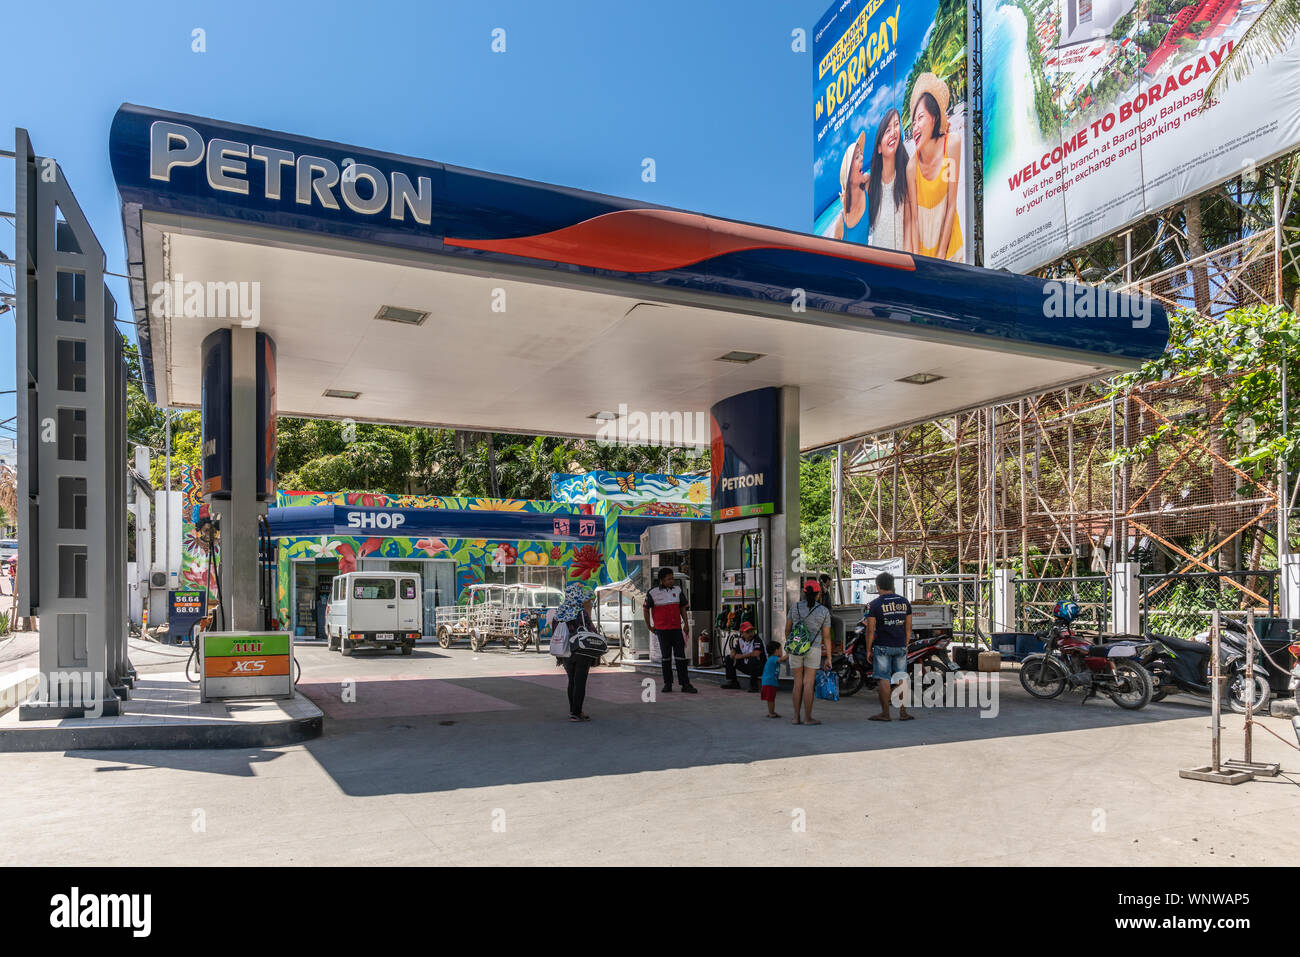 Manoc-Manoc, Boracay Island, Philippines - March 4, 2019: Near Cagban Jetty Port and ferry pier. Petron gas statio with people and motorcycles. Stock Photo